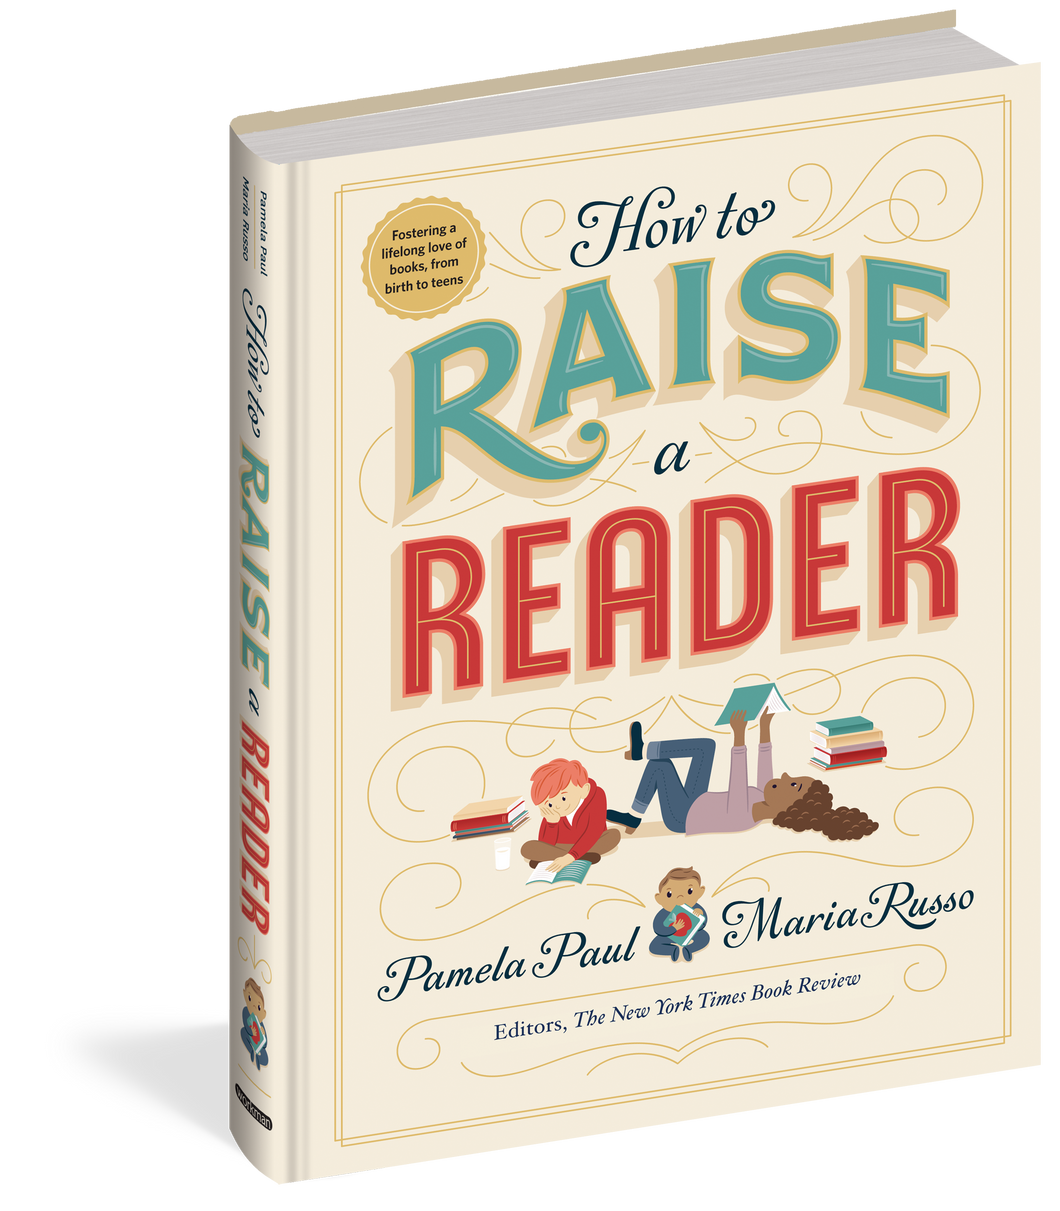 How to Raise a Reader by Pamela Paul & Maria Russo